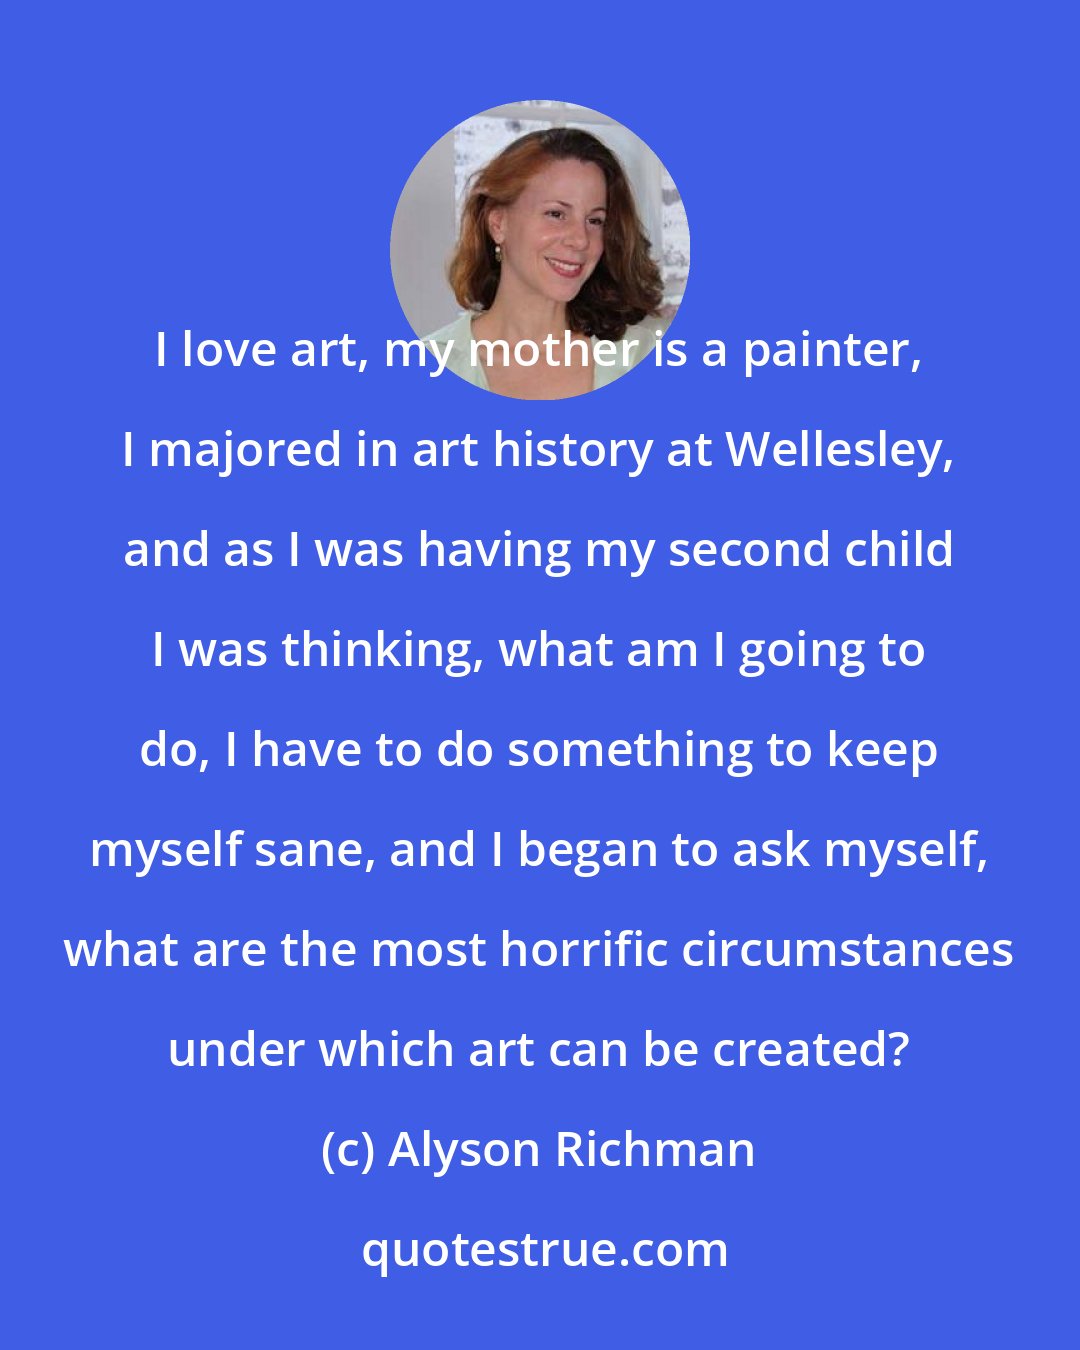 Alyson Richman: I love art, my mother is a painter, I majored in art history at Wellesley, and as I was having my second child I was thinking, what am I going to do, I have to do something to keep myself sane, and I began to ask myself, what are the most horrific circumstances under which art can be created?